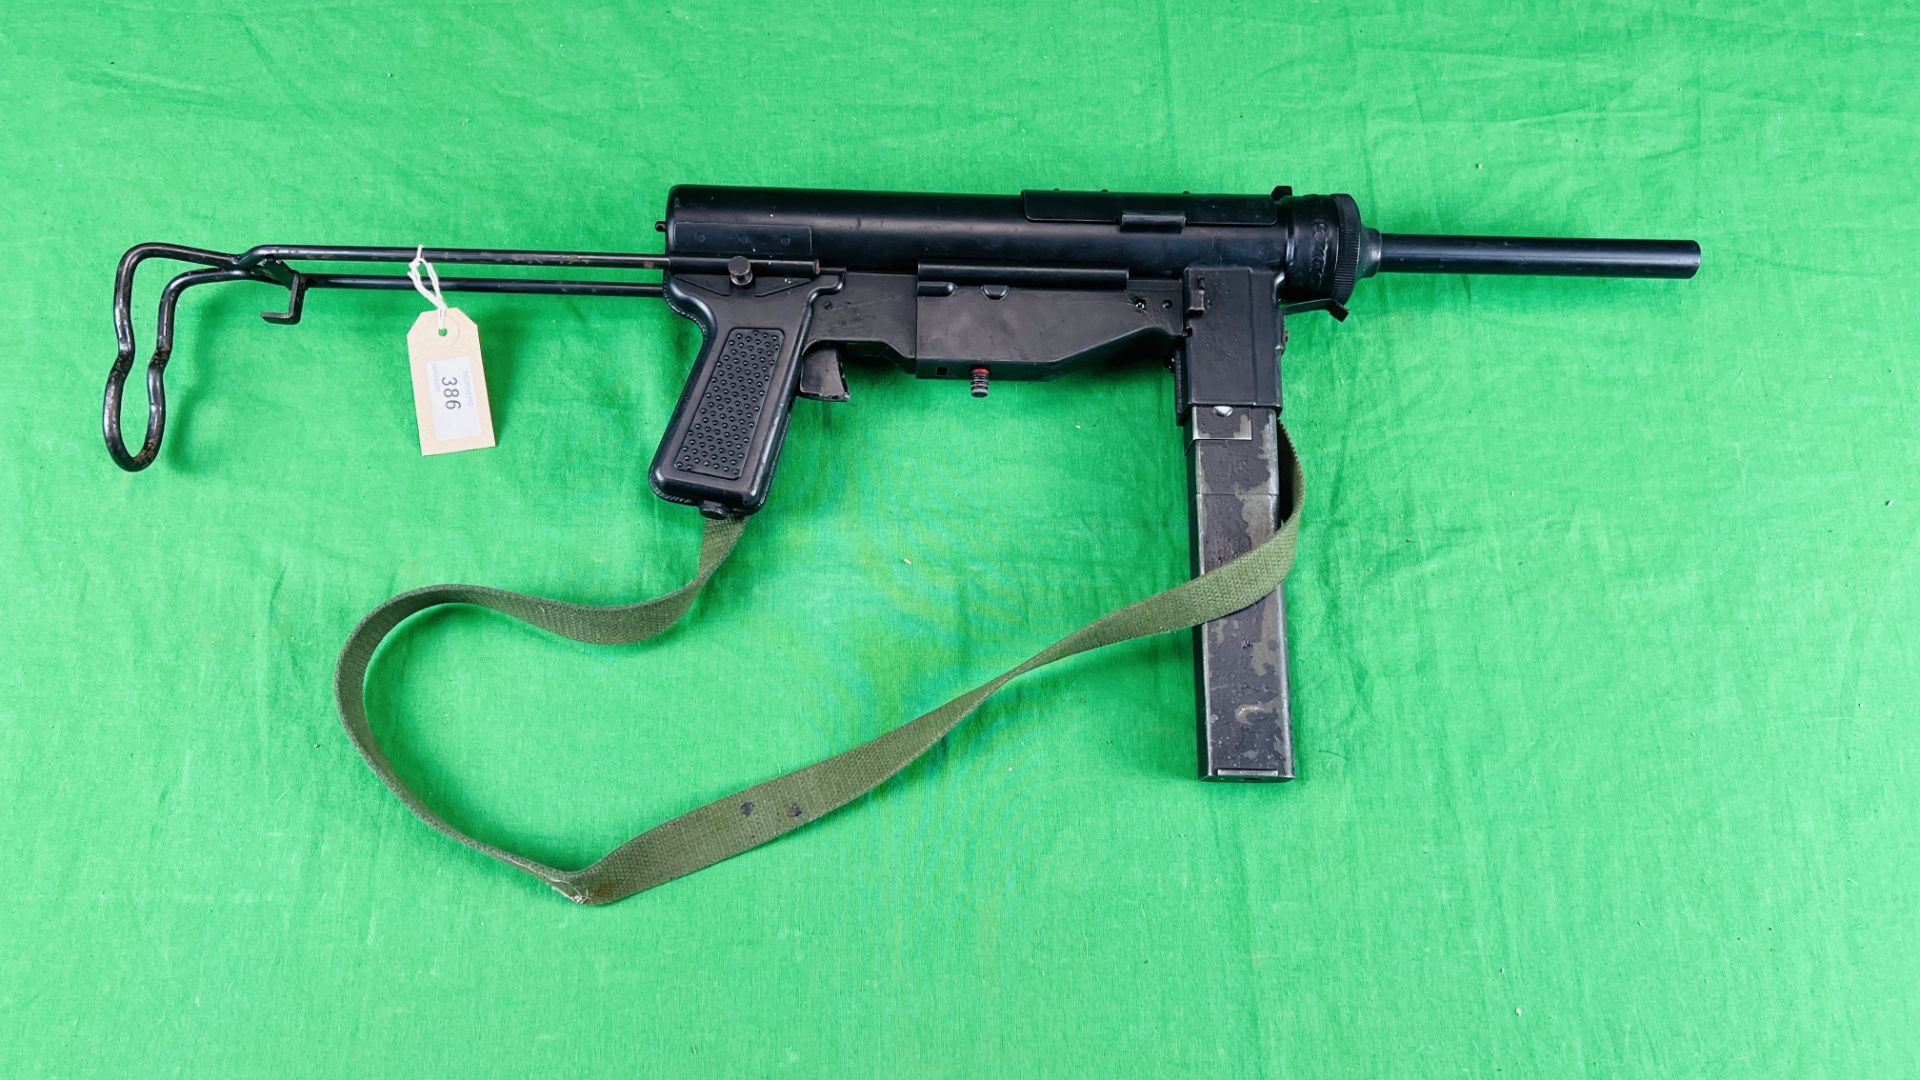 A VINTAGE HUDSON REPLICA BB GUN - (ALL GUNS TO BE INSPECTED AND SERVICED BY QUALIFIED GUNSMITH